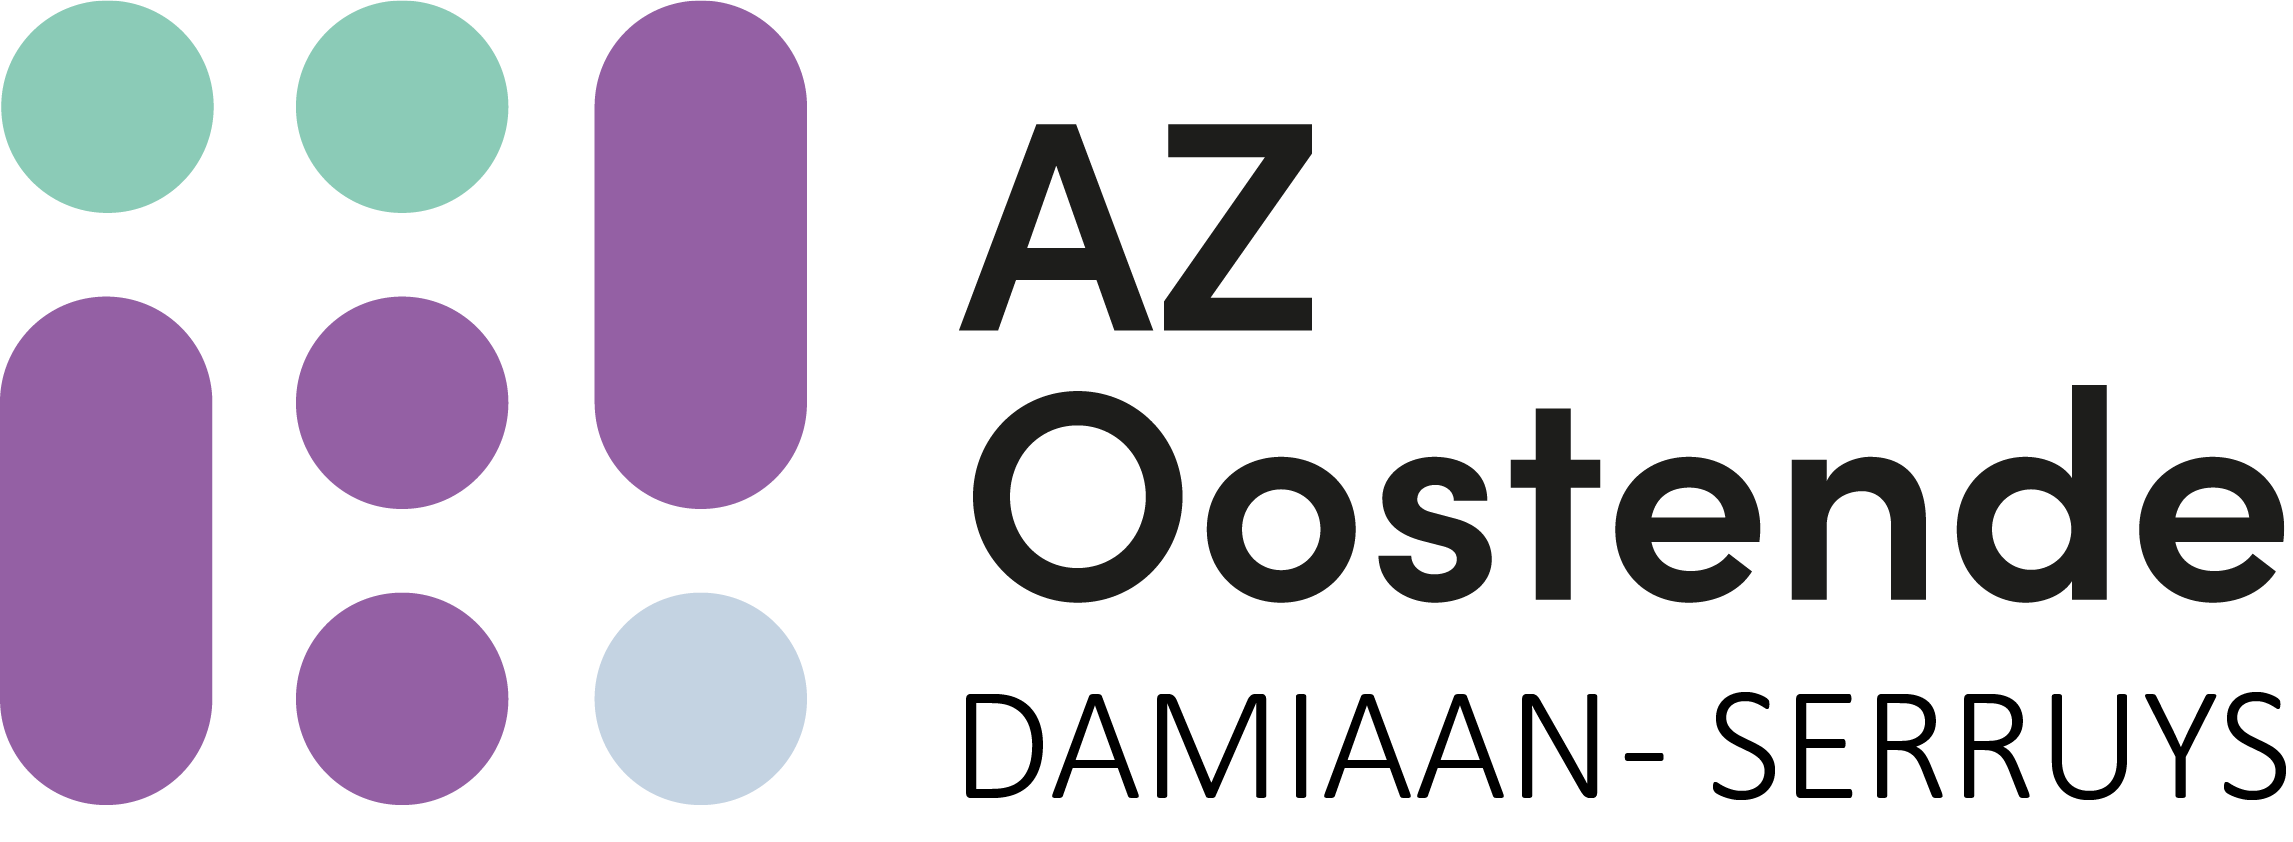 AZ Ostend improves efficiency of medical equipment thanks to location-based asset tracking from PHI DATA and Blyott